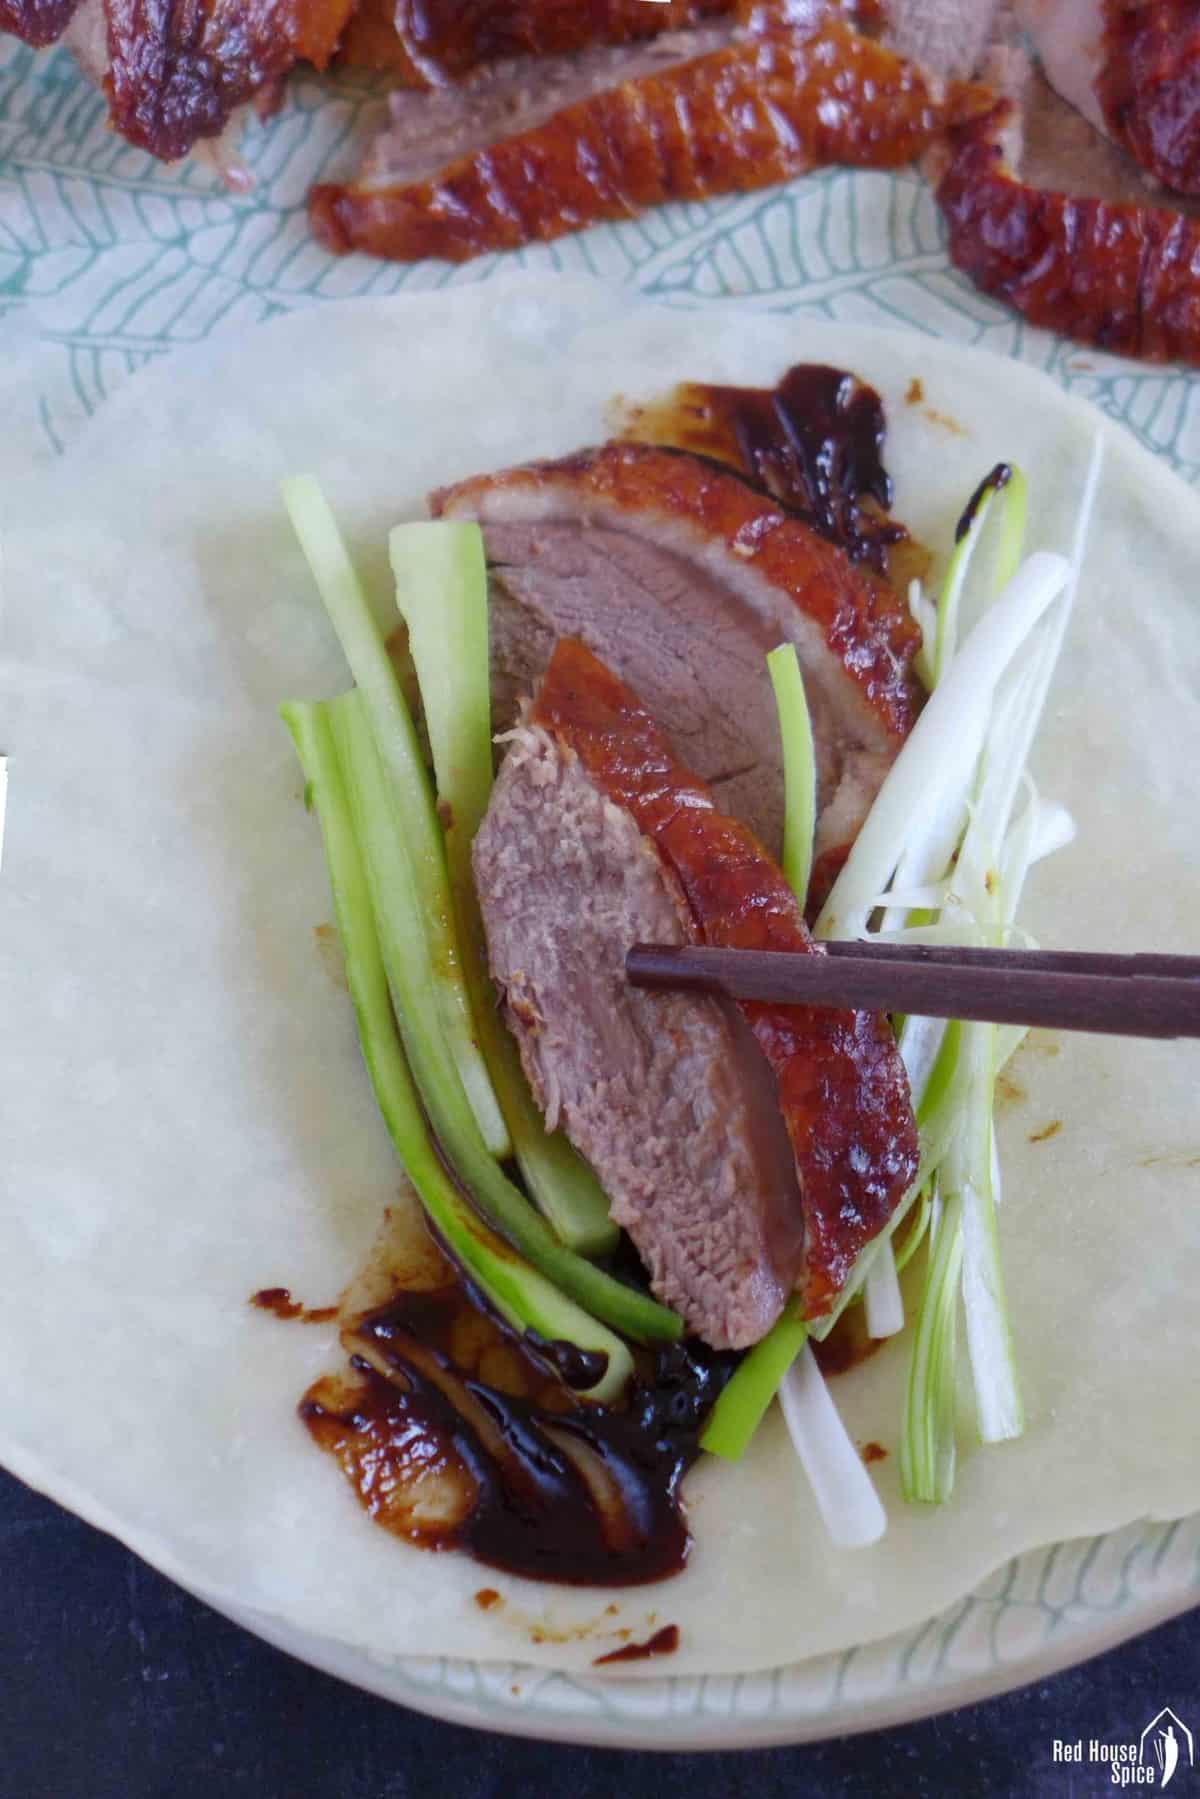 two slices of duck and vegetables on a thin pancake.